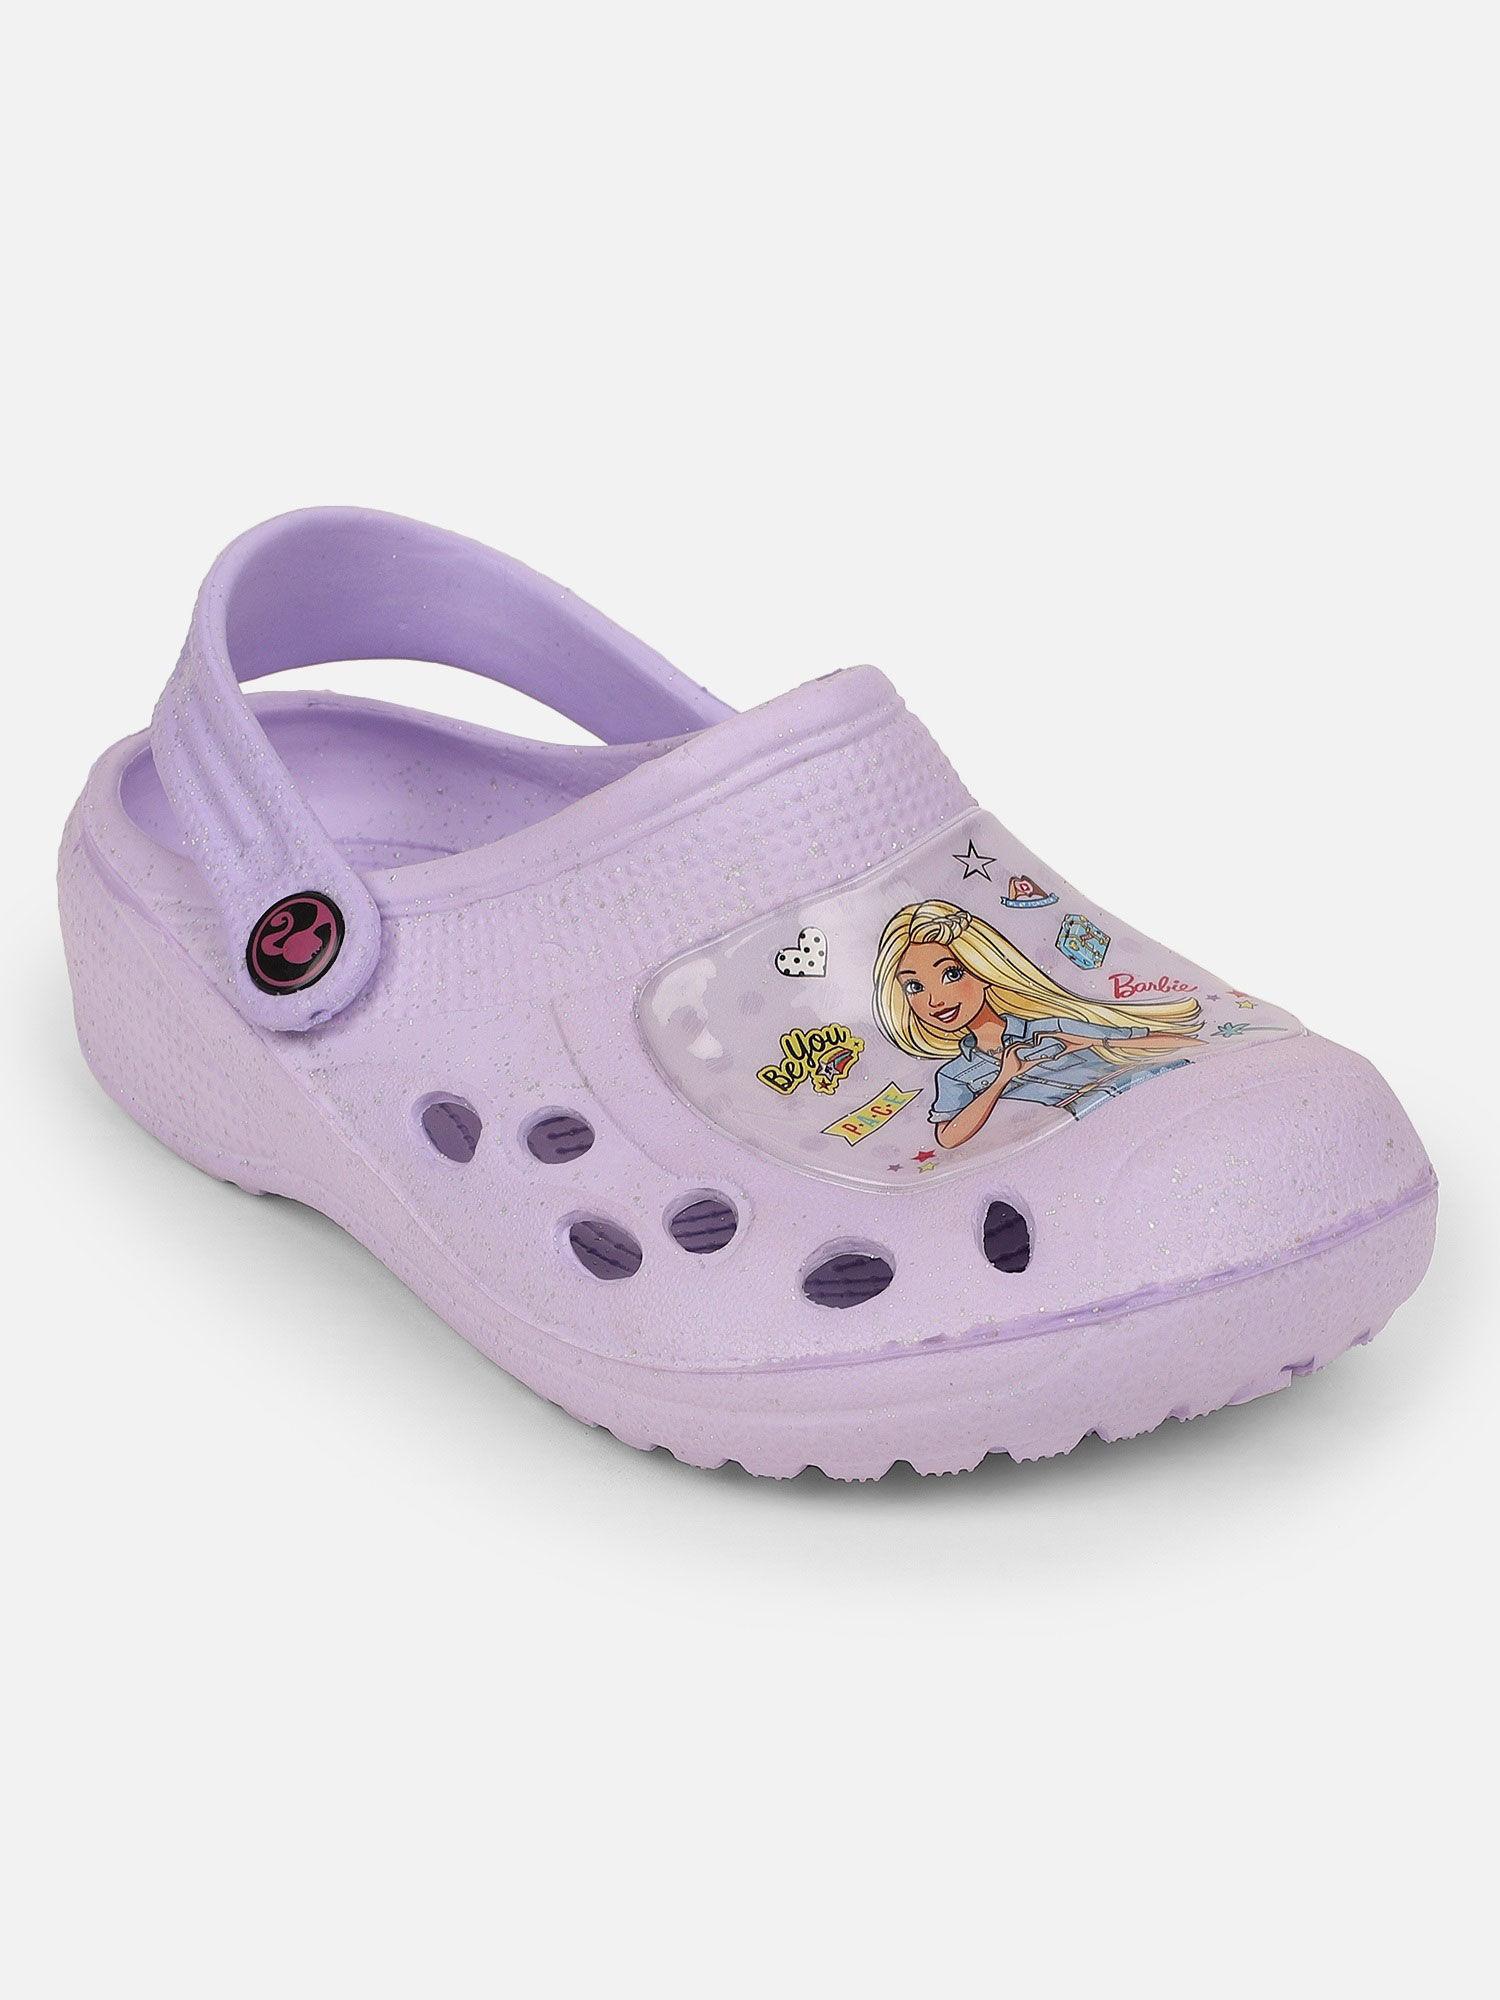 barbie featured purple clogs for girls